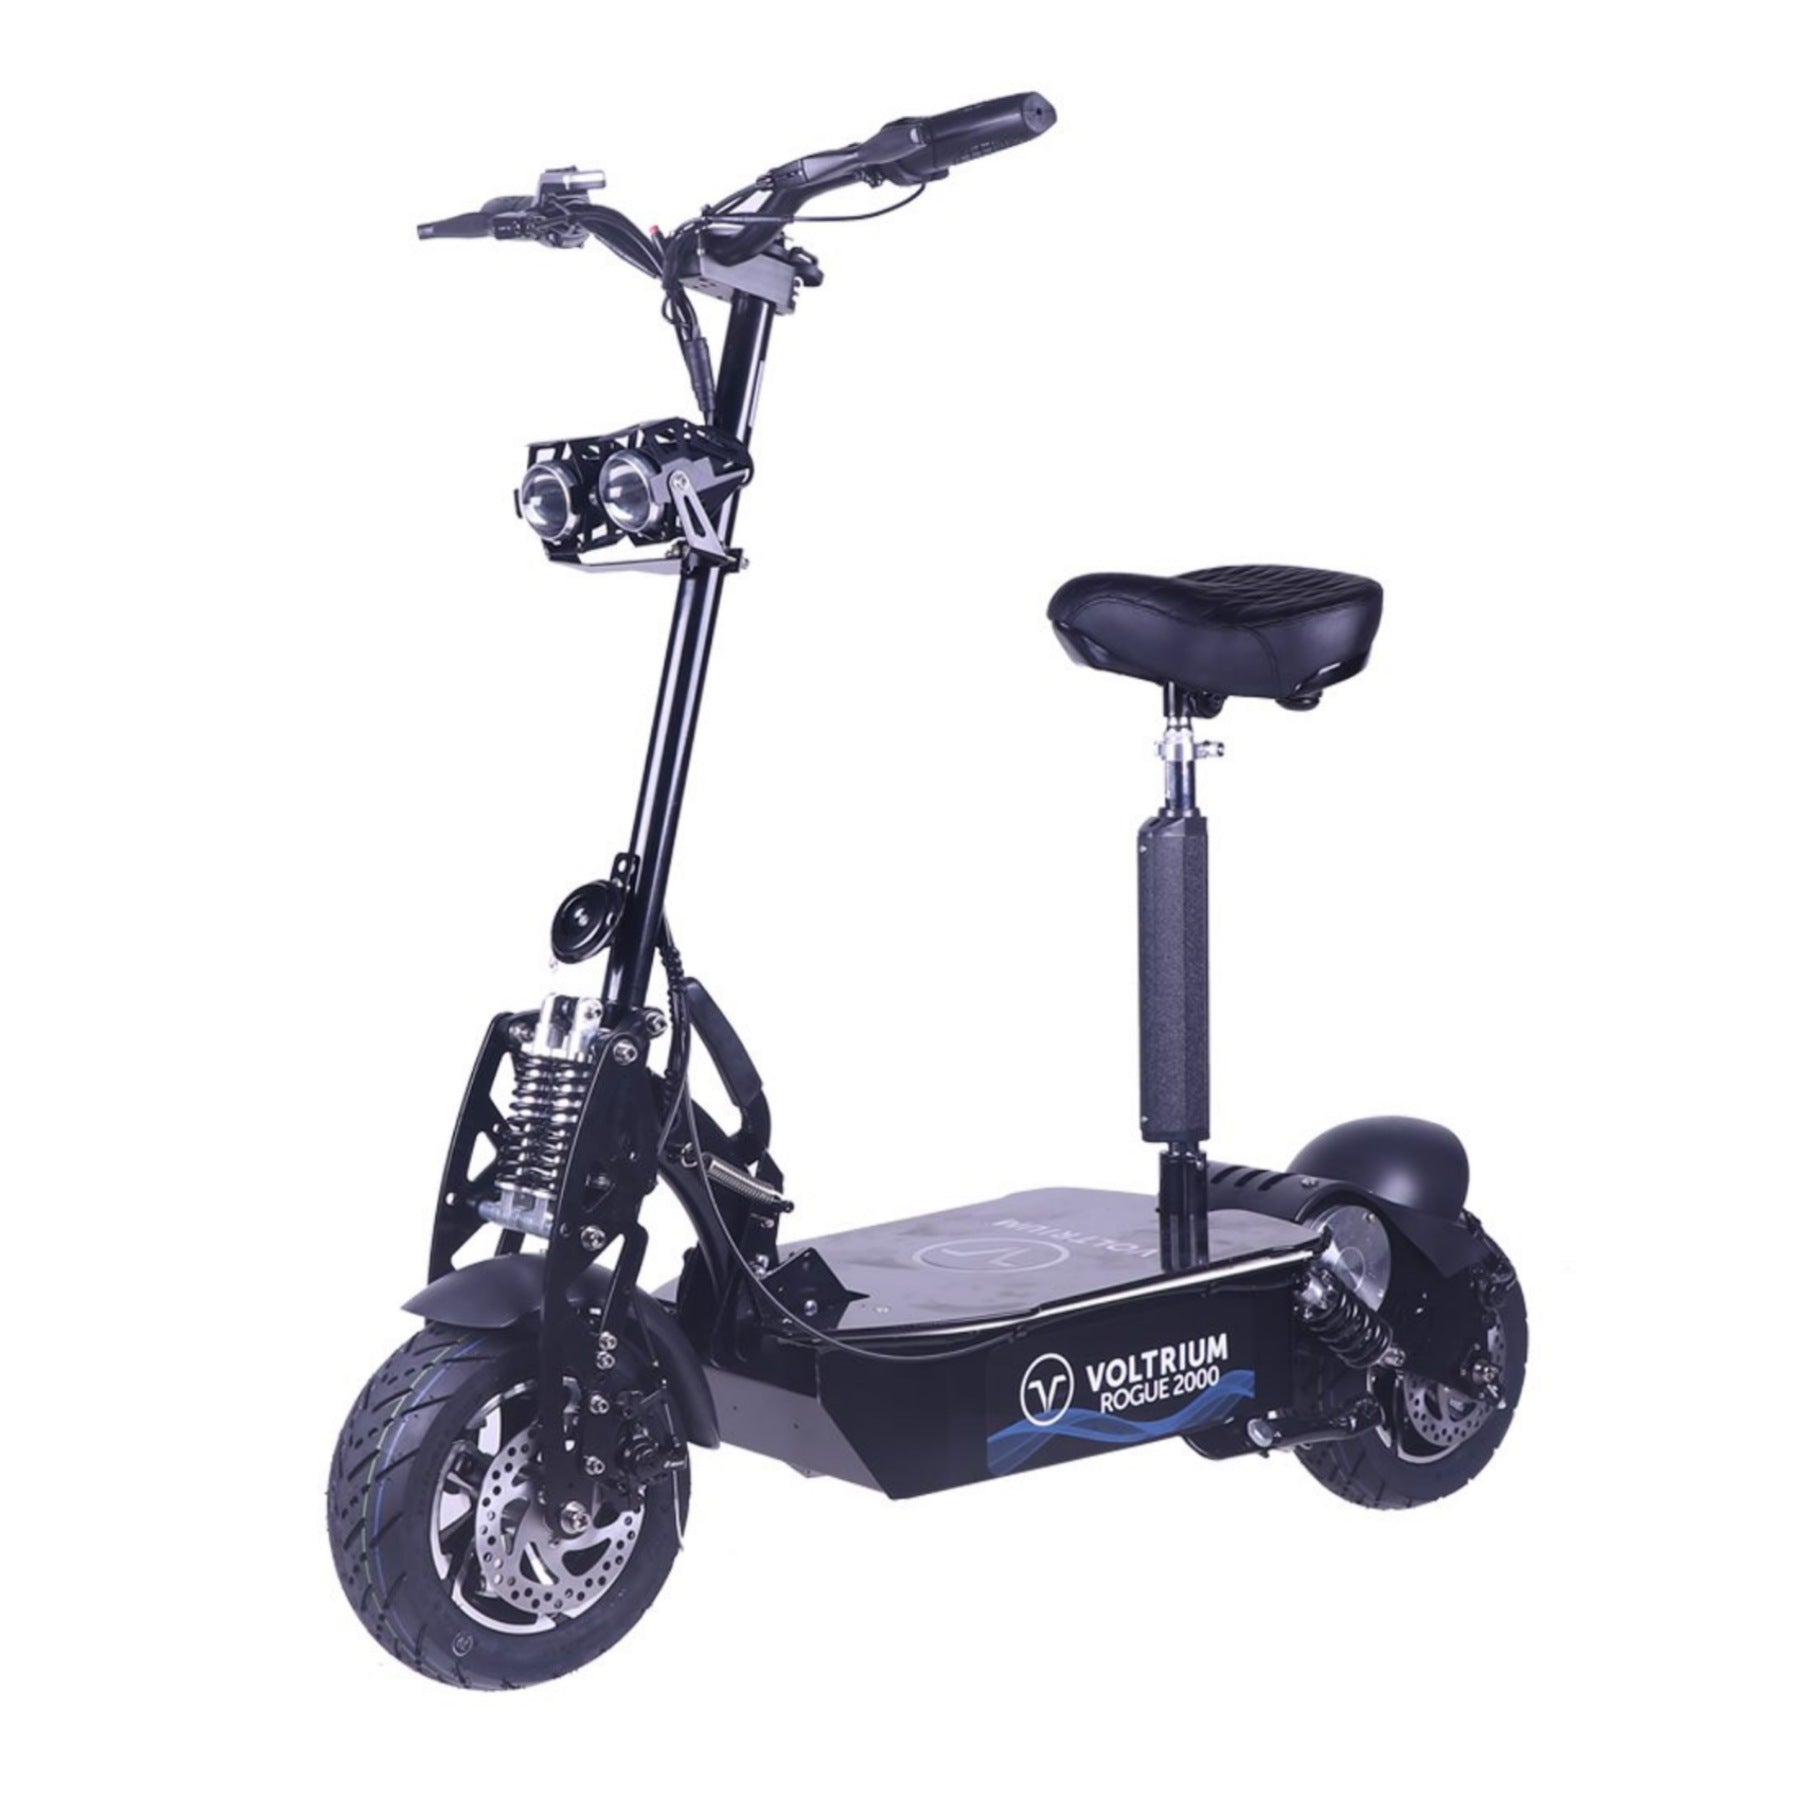 Installing seats on an electric scooter is a great choice.#scooter